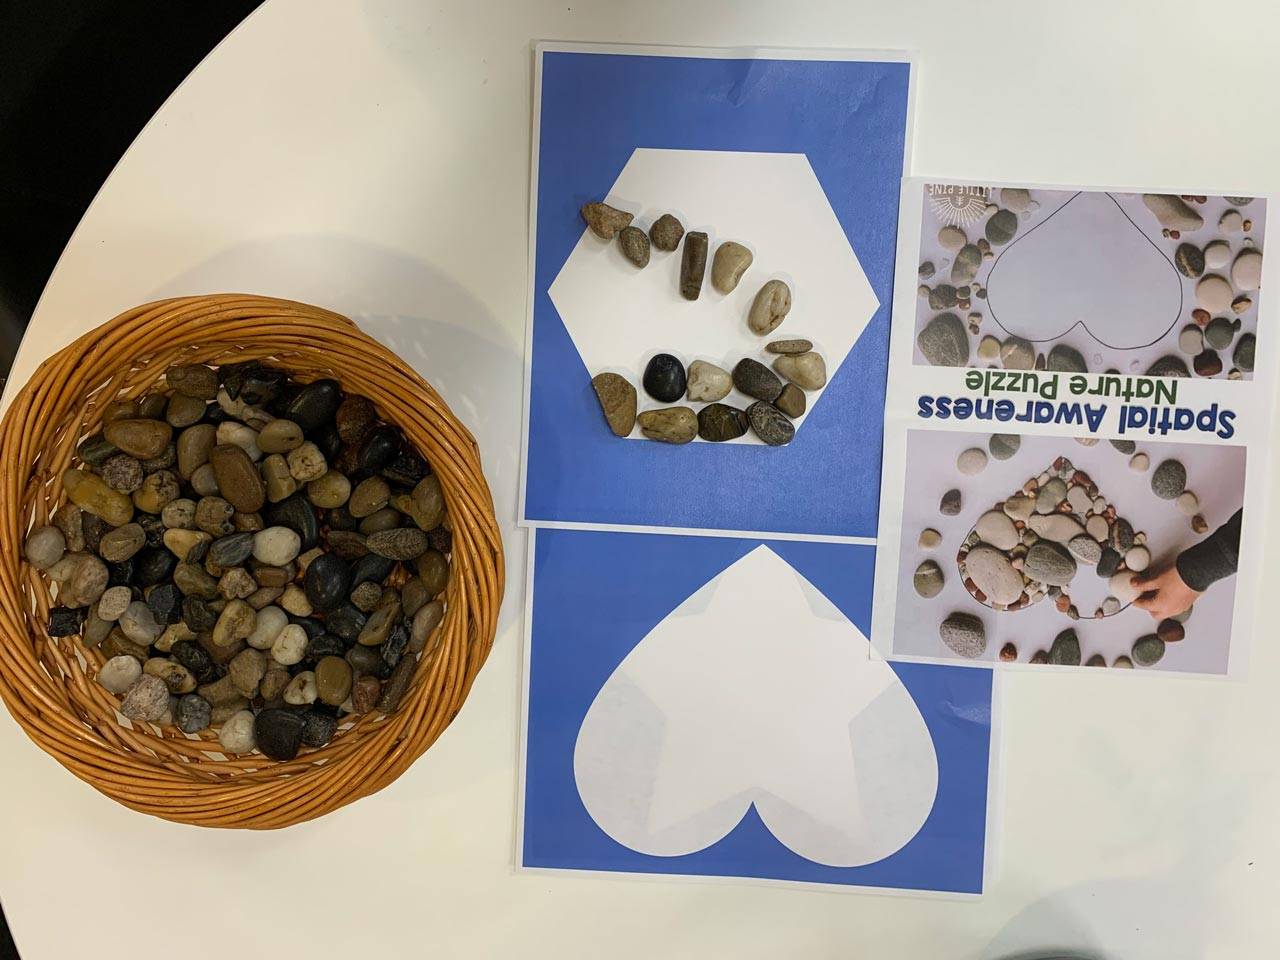 Renew dementia day care activity to complete a nature puzzle that includes white shapes on a blue sheet of paper to be filled with stones